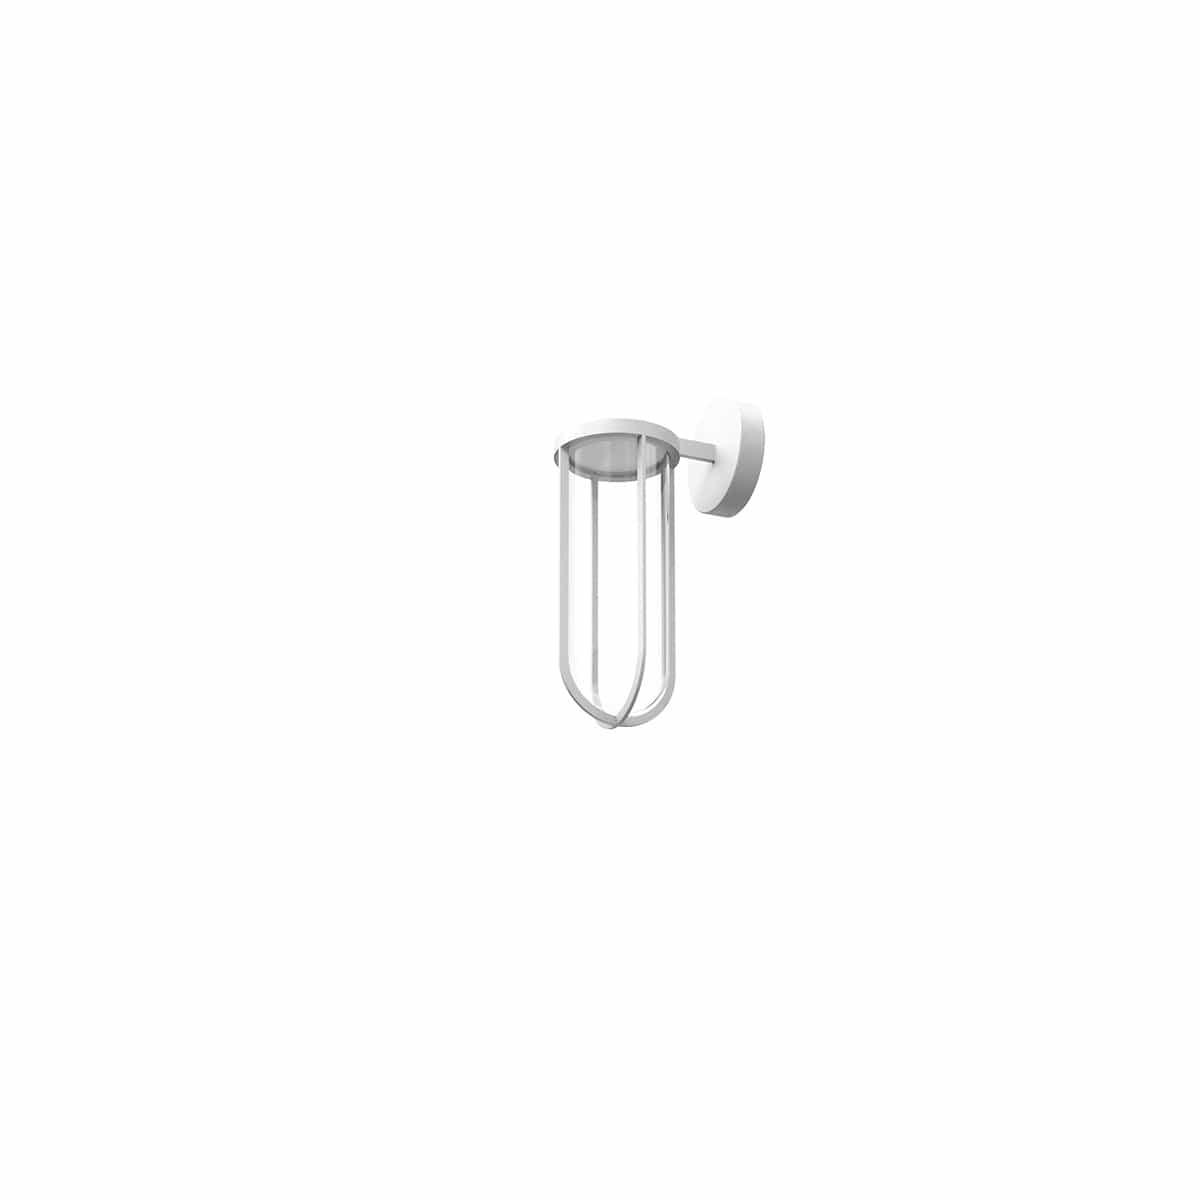 In Vitro Wall Sconce Outdoor Lighting - Curated - Lighting - Flos